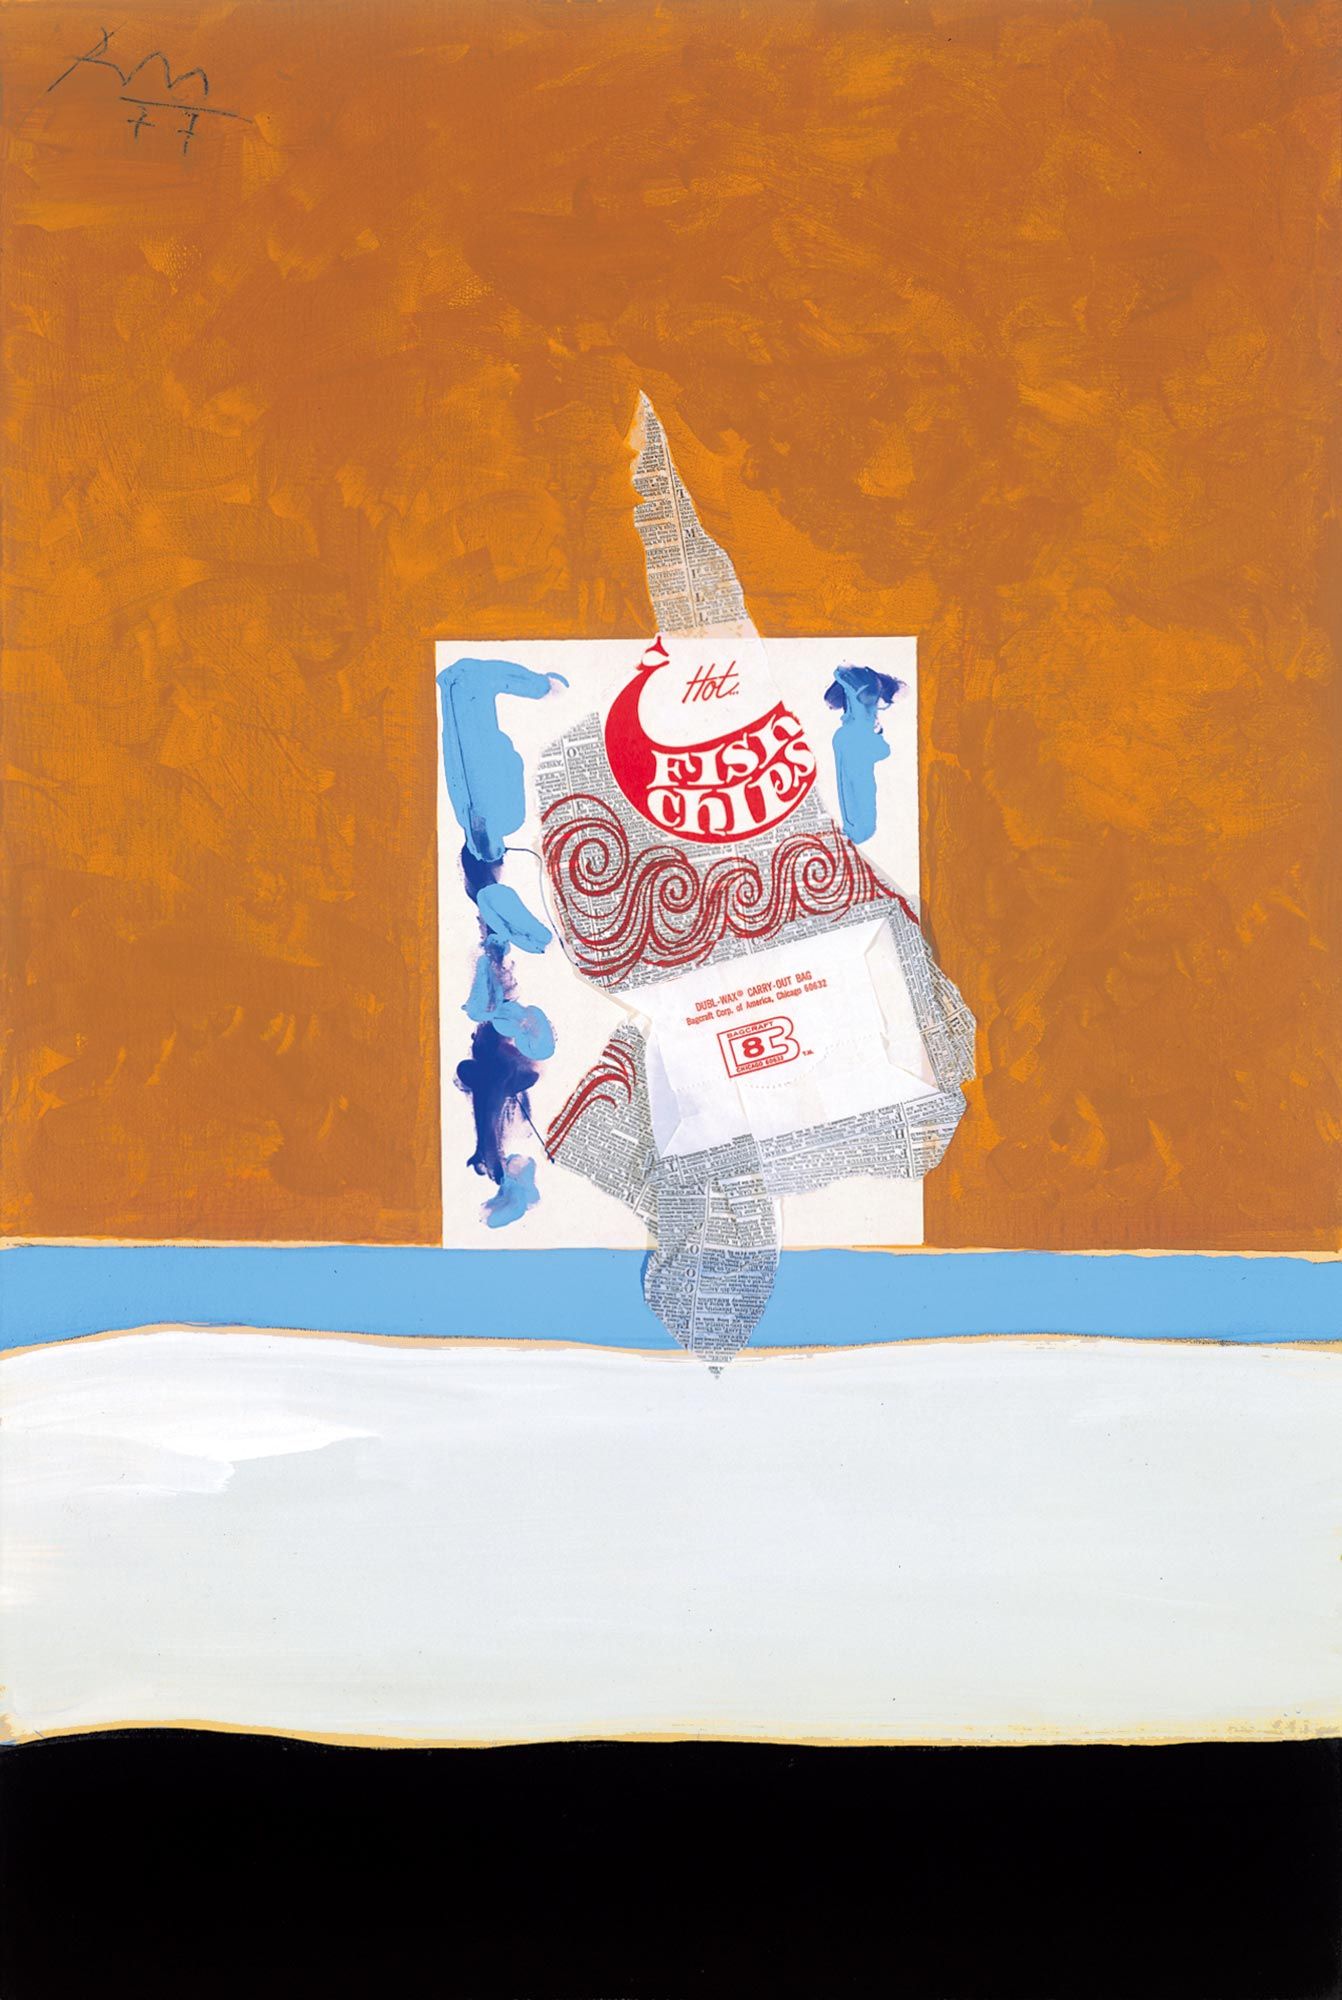 a collage with torn packaging from fish and chips at the center